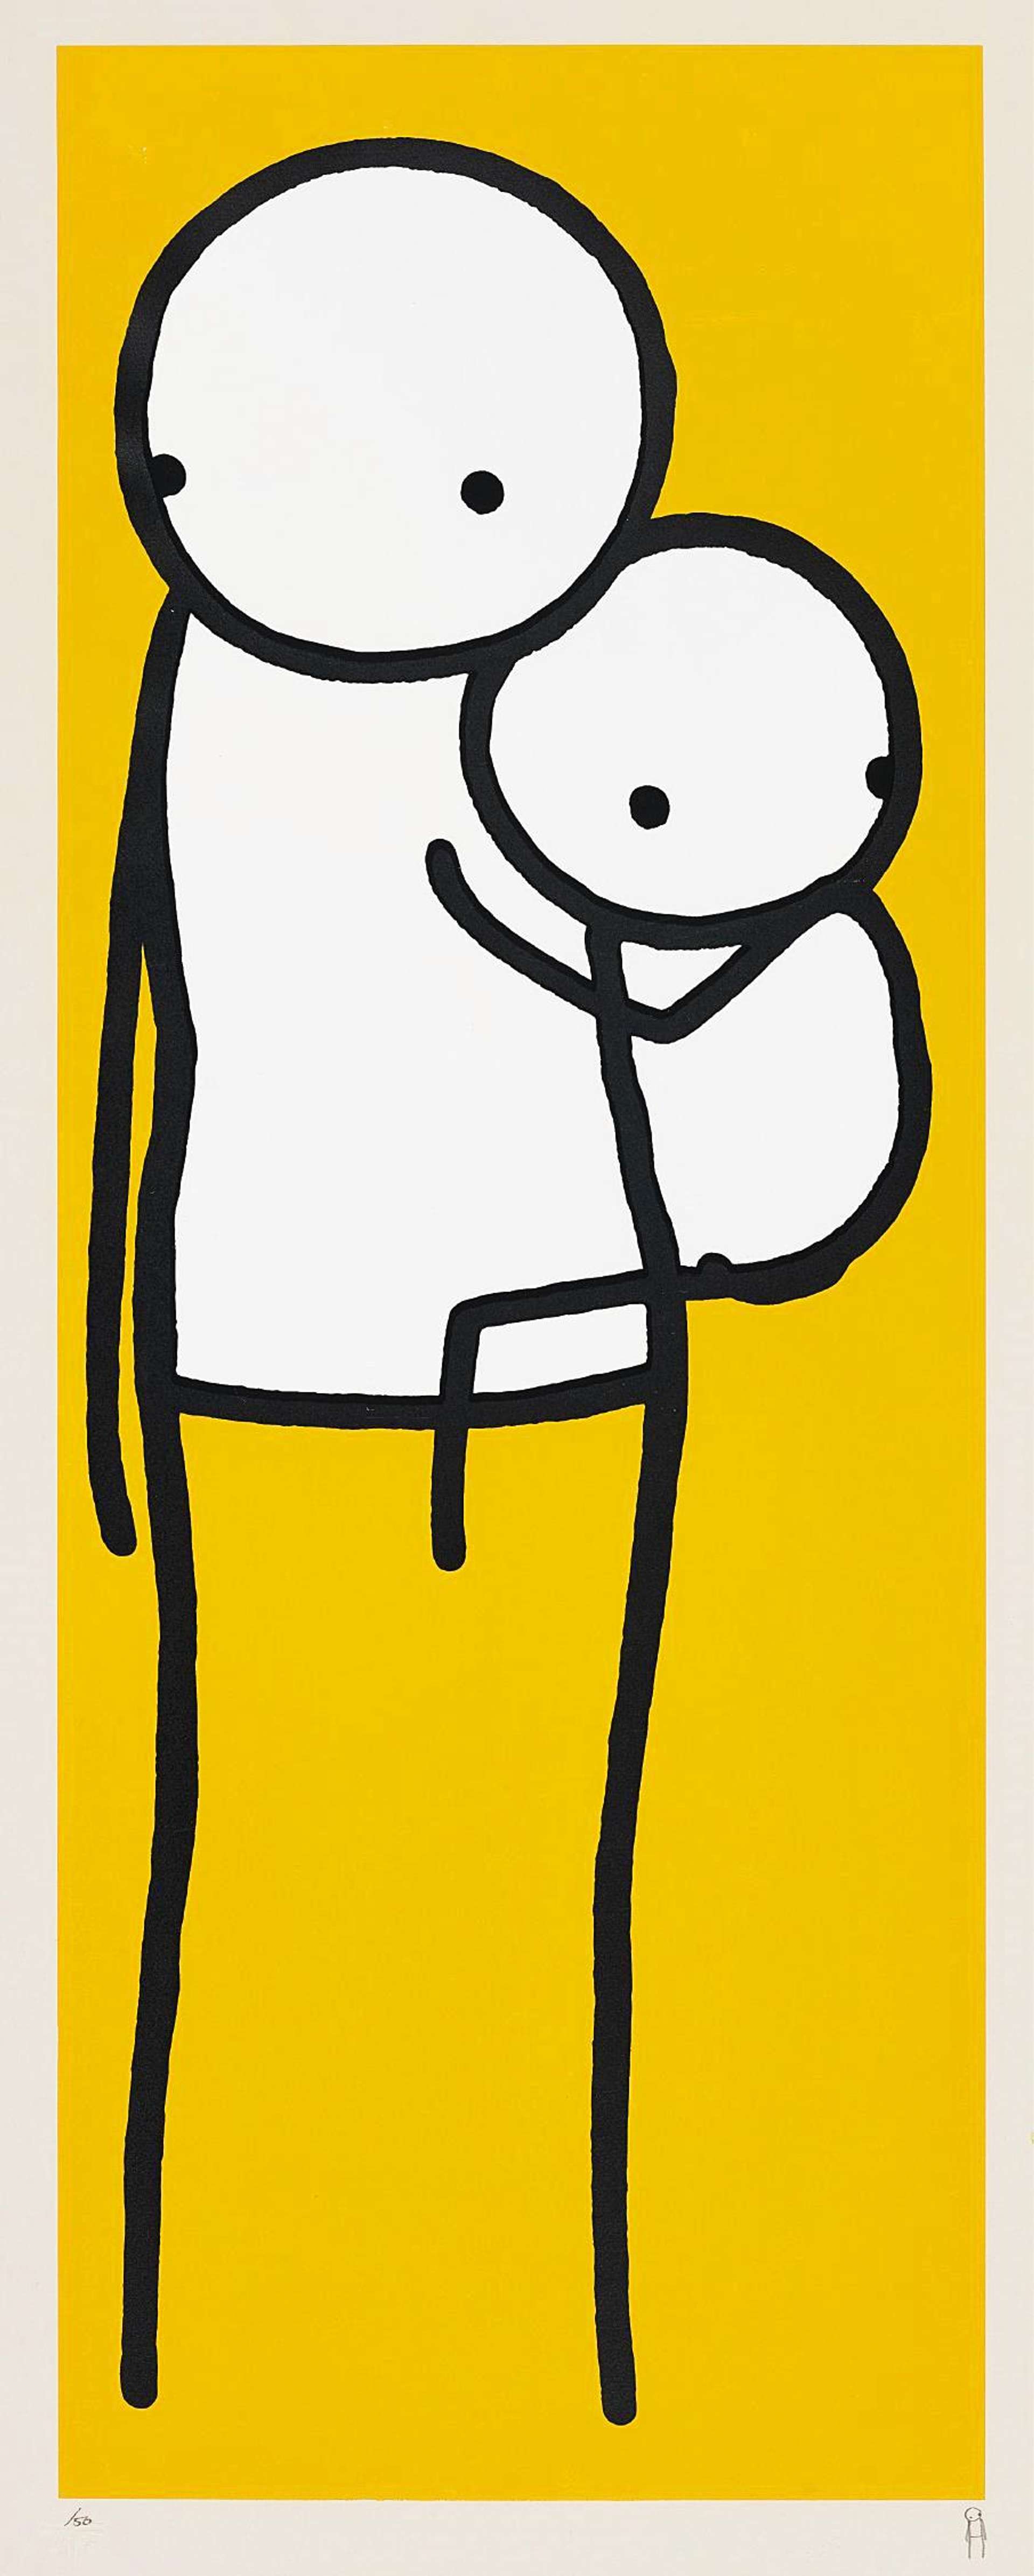 A tall rectangular yellow background with a traditional stick figure drawing of a mother holding her child.